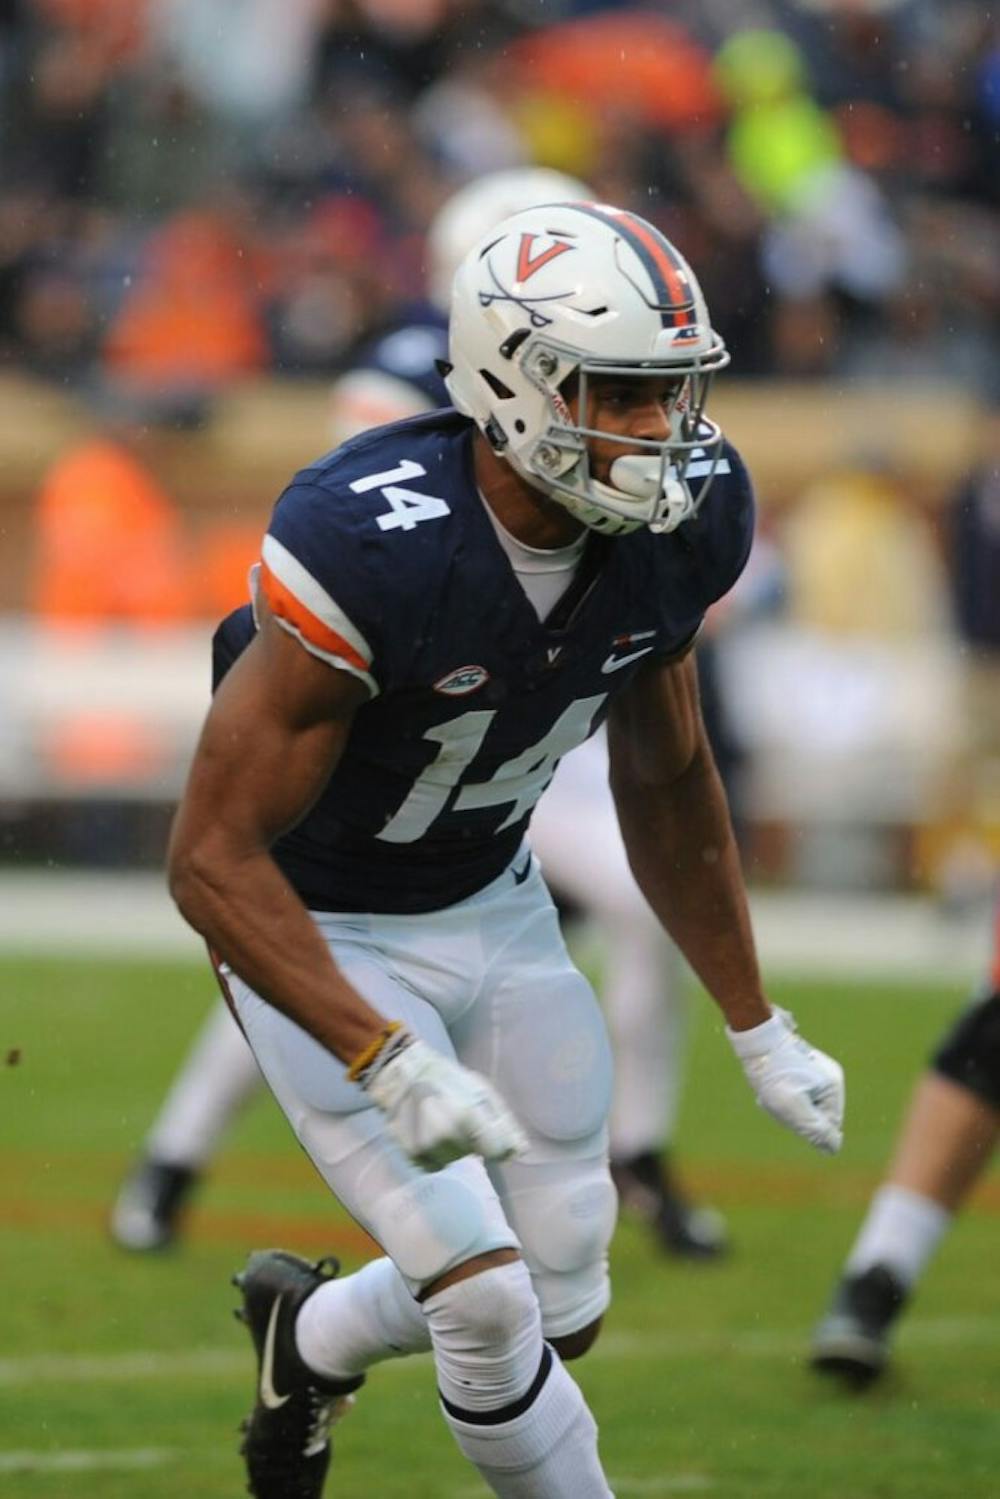 <p>Senior wide receiver Andre Levrone has provided a much needed spark for Virginia's offense in the middle of the season, recording two touchdowns against Georgia Tech and catching six passes for 92 yards against Louisville.</p>